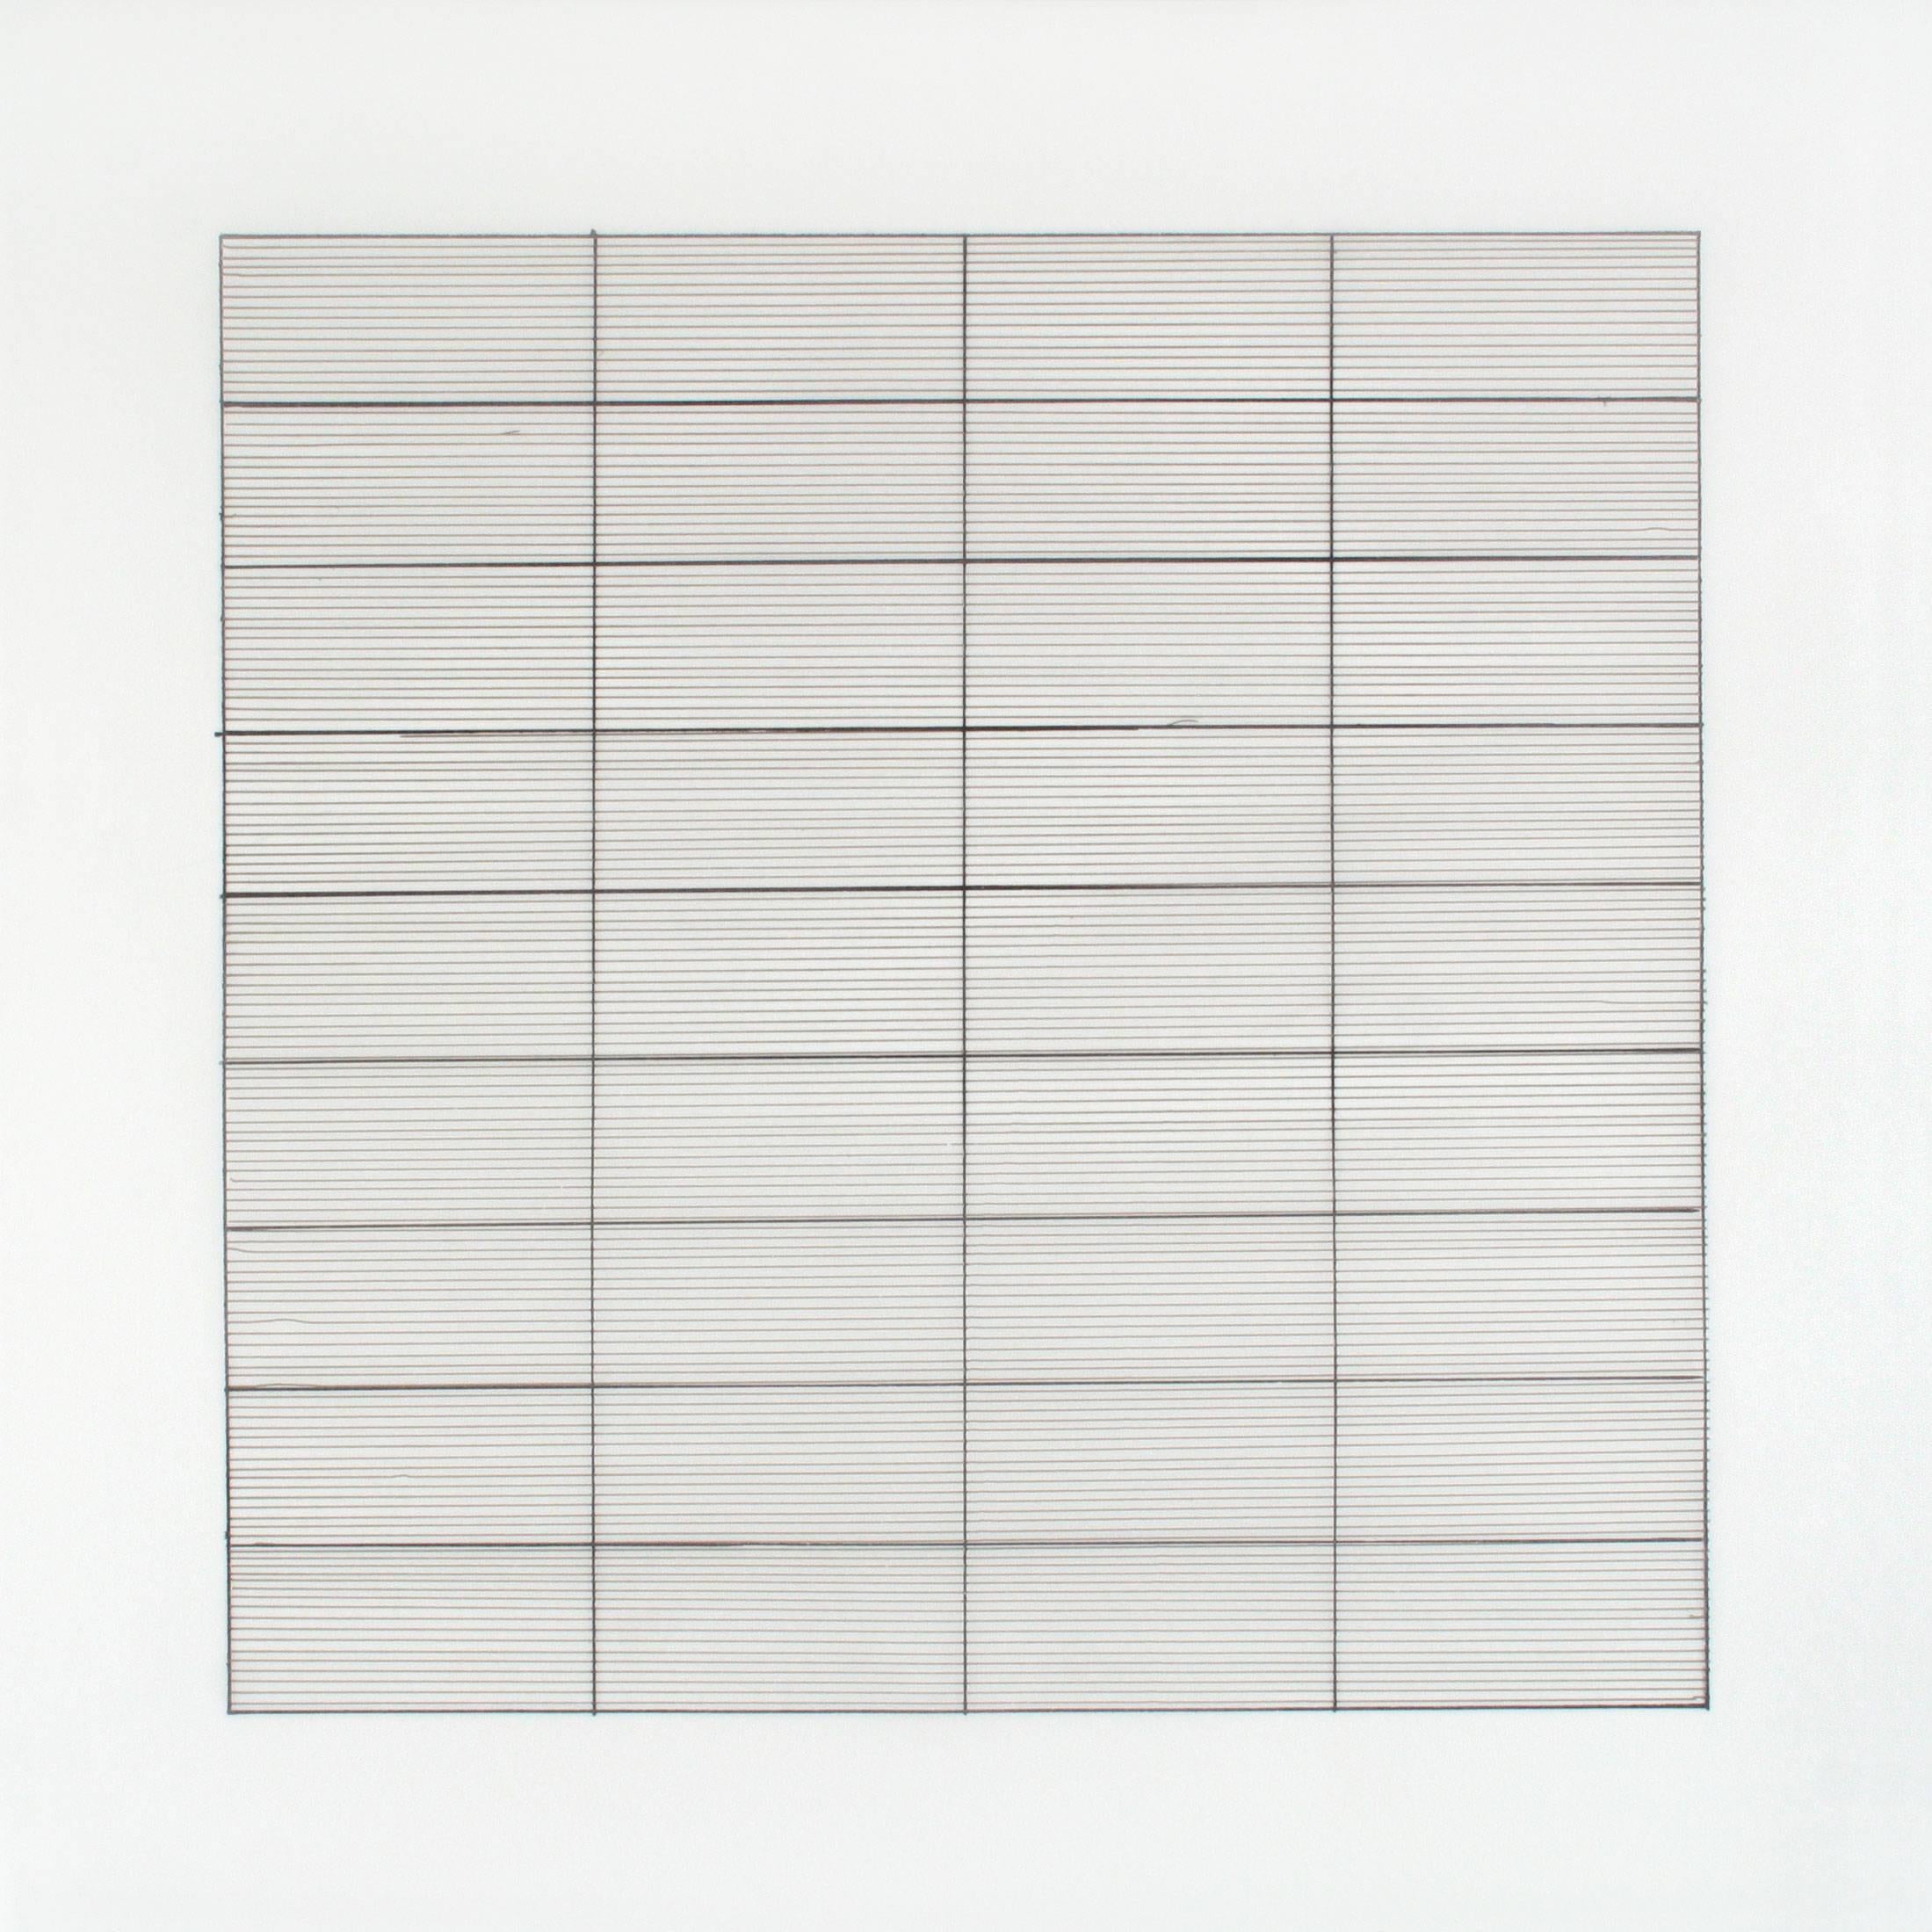 AGNES MARTIN. Paintings and Drawings 1974-1990 4